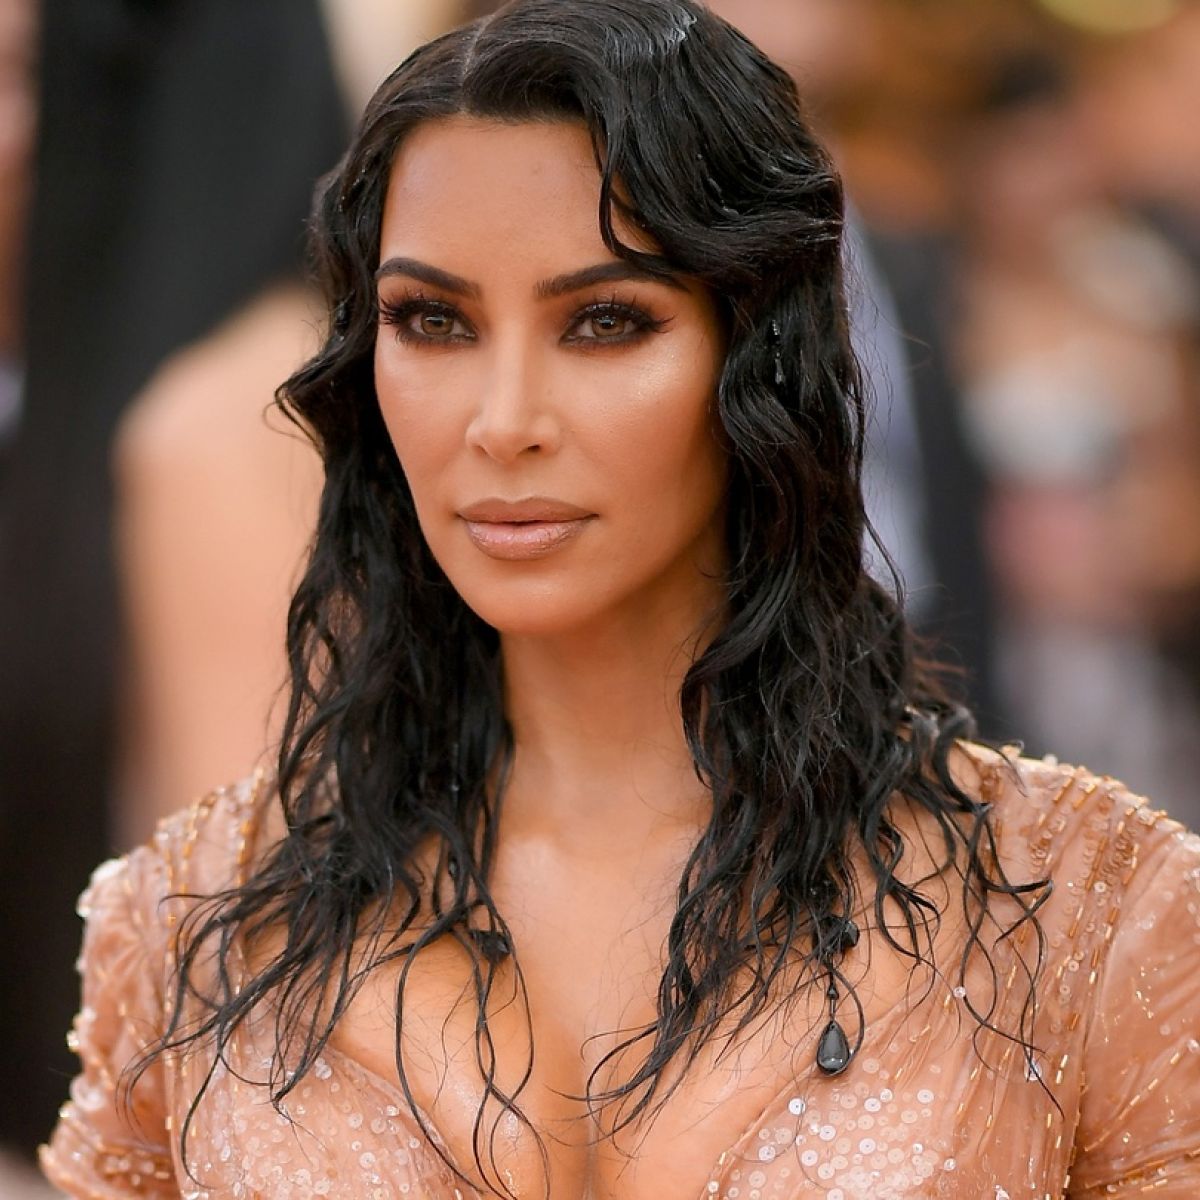 Kim Kardashian West at 40: How the queen of social media changed the world